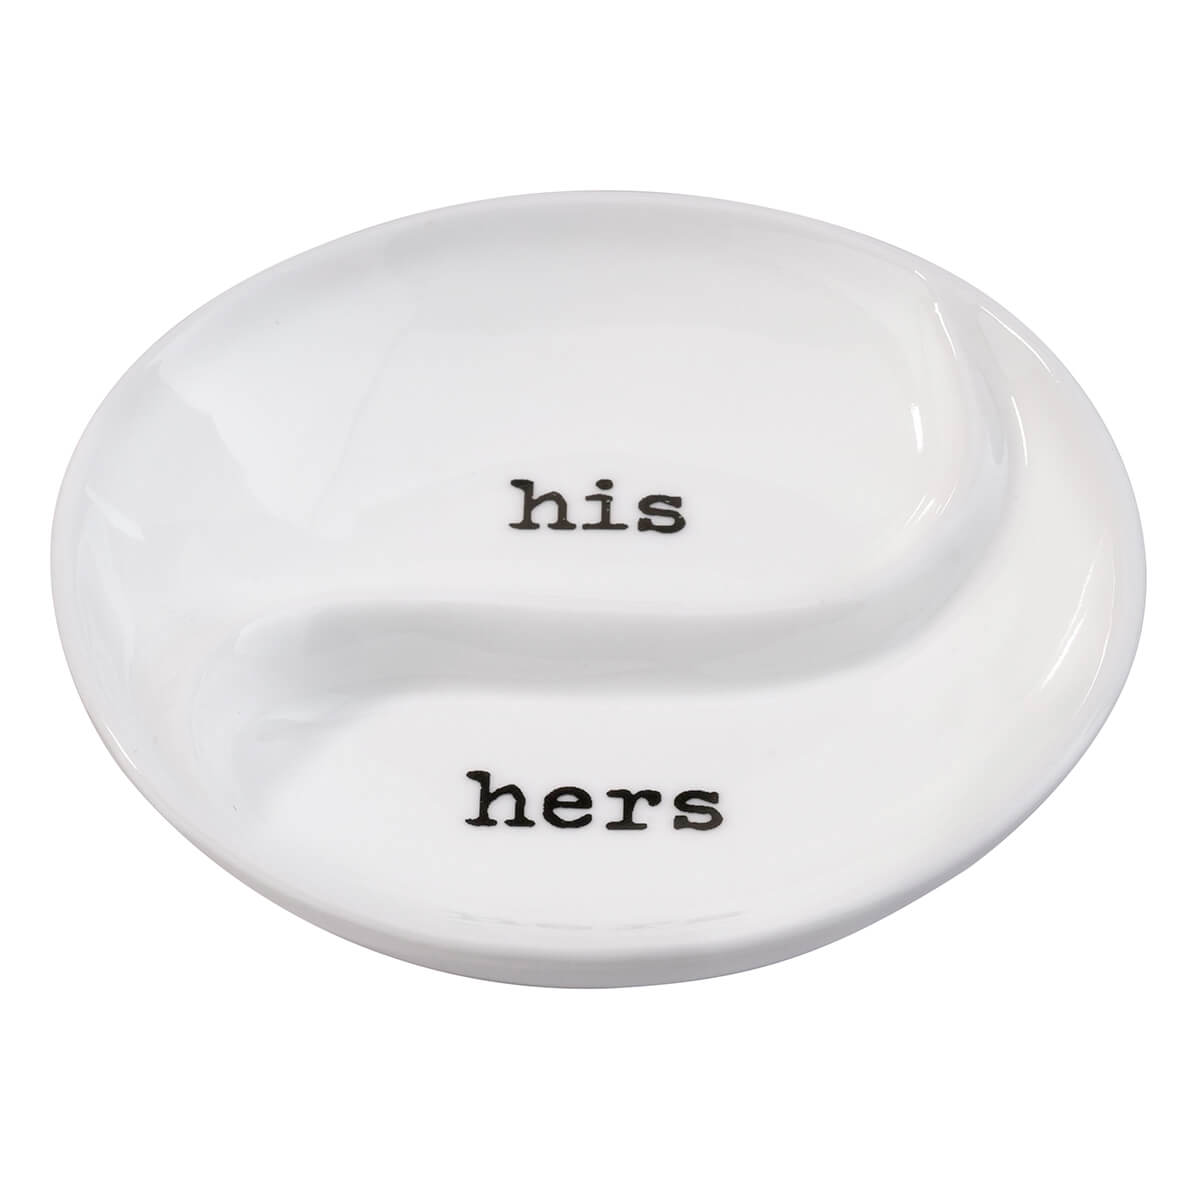 "HIS  & HERS" RING DISH | Wedding Ring Dish for two rings - Minter and Richter Designs